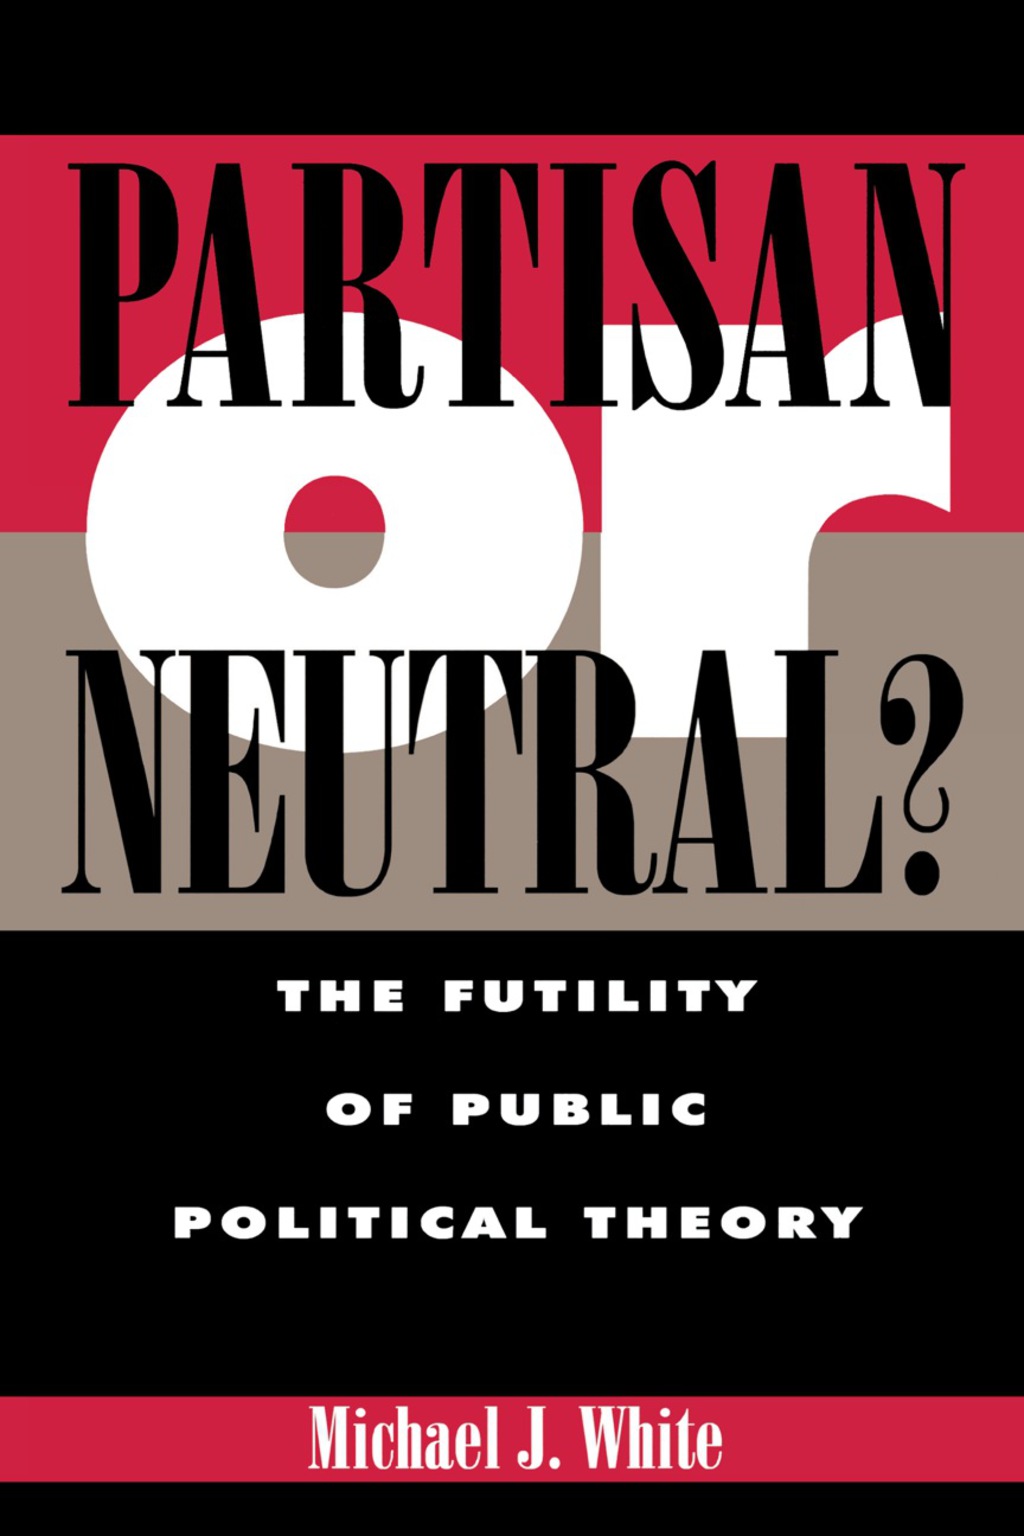 ISBN 9780847684533 product image for Partisan or Neutral? (eBook Rental) | upcitemdb.com